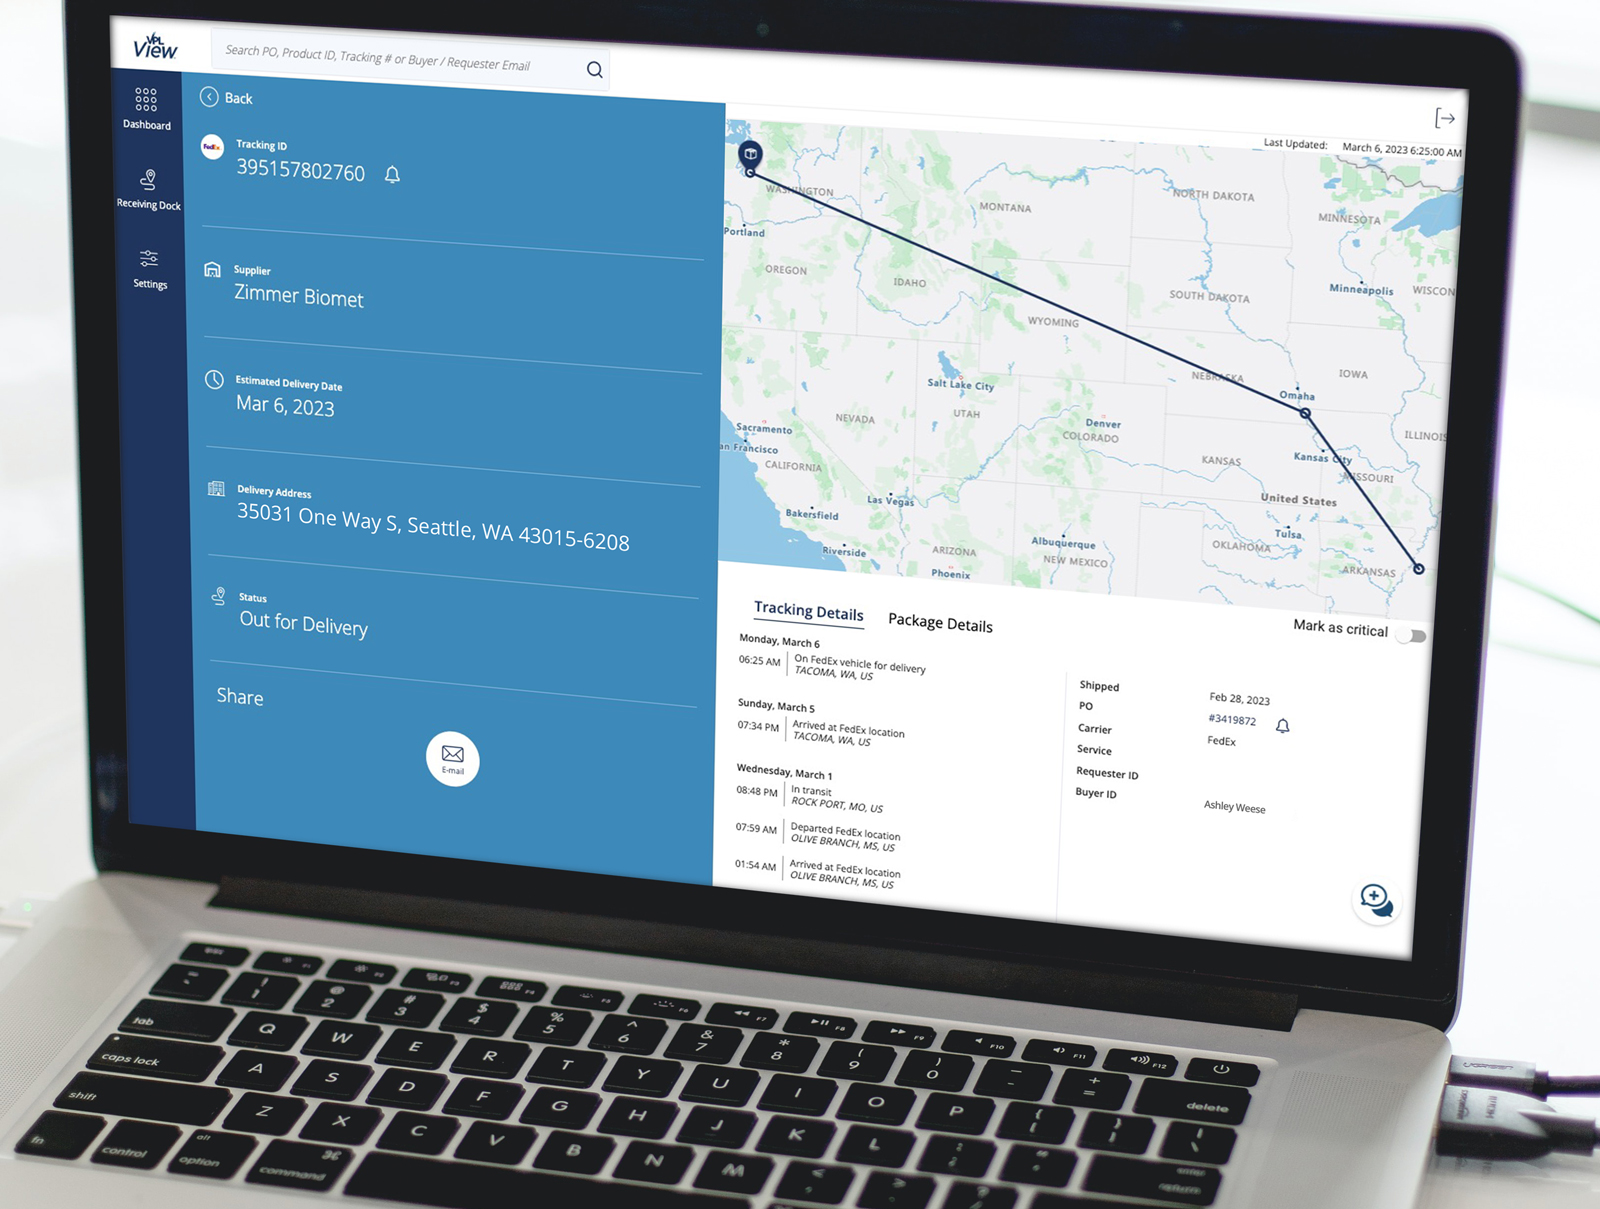 Visibility Dashboard allows you to track-and-trace orders on a map in real-time. You can also opt into email alerts at the package-level to to receive critical shipment alerts for your most important packages.